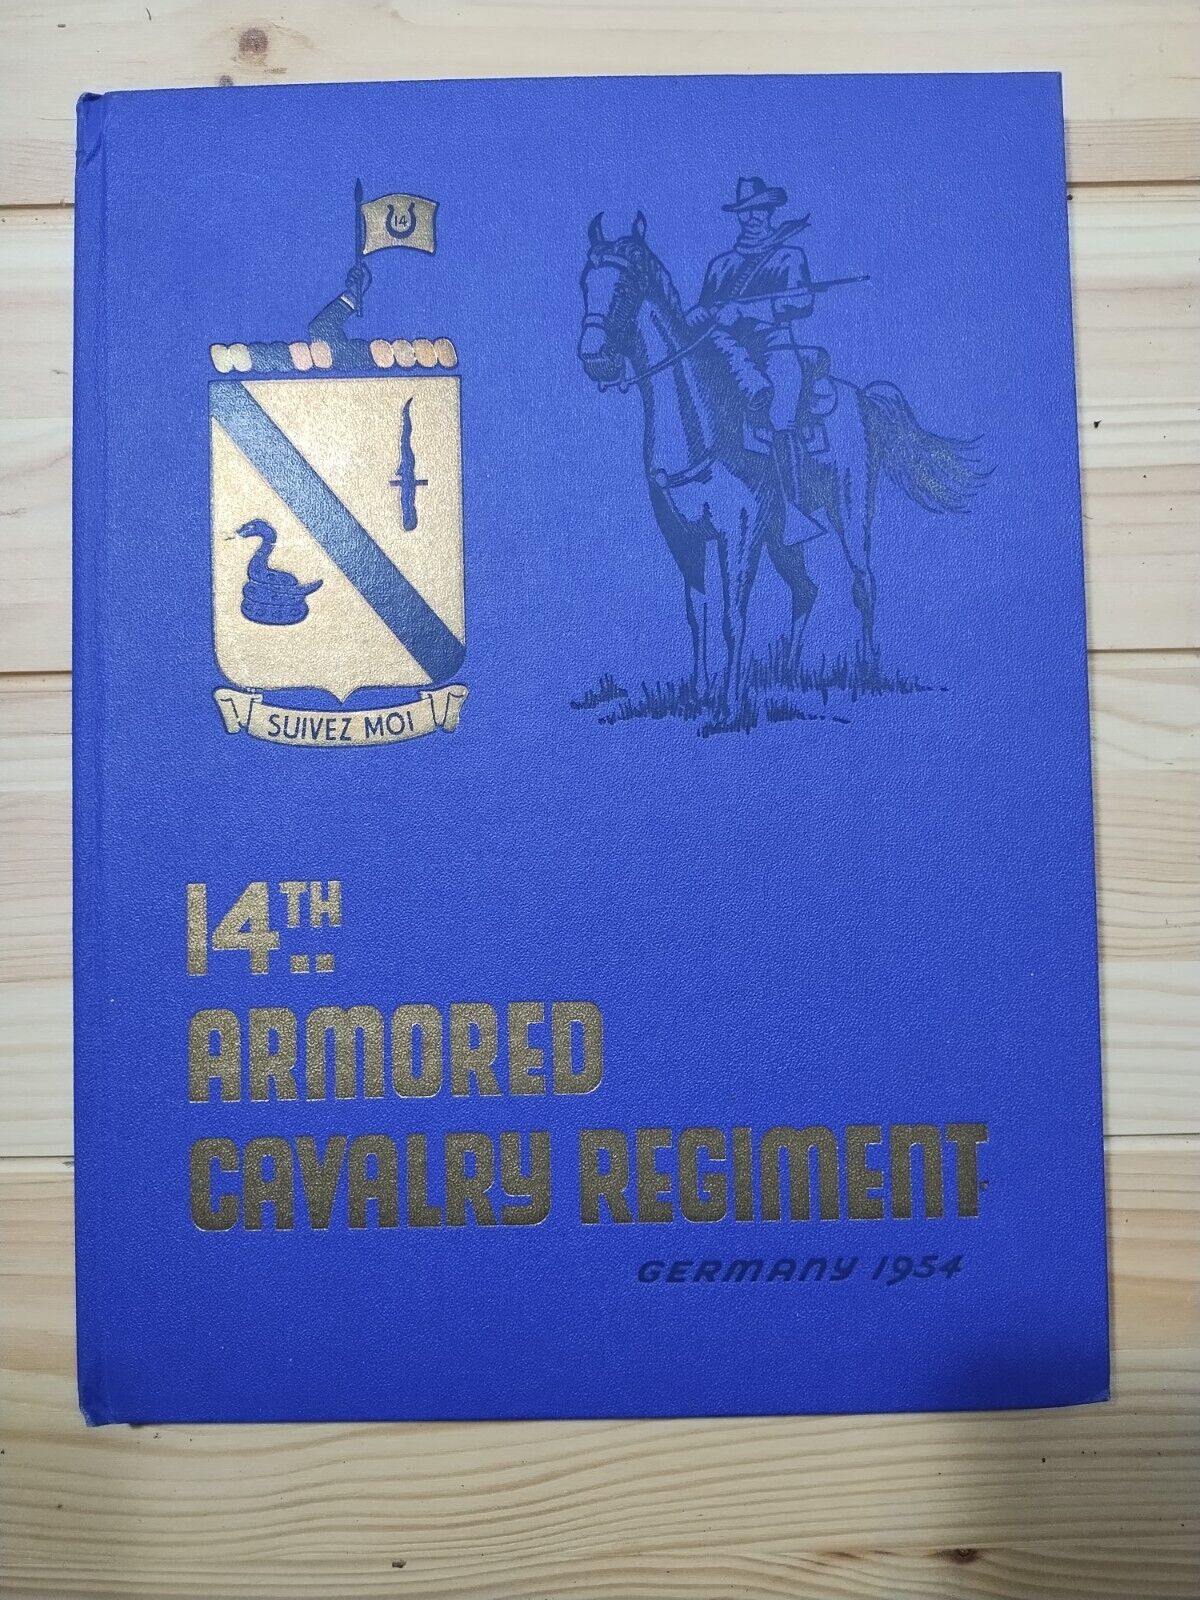 VERY RARE 14th Armored Cavalry Regiment Miliary Yearbook Germany 1954